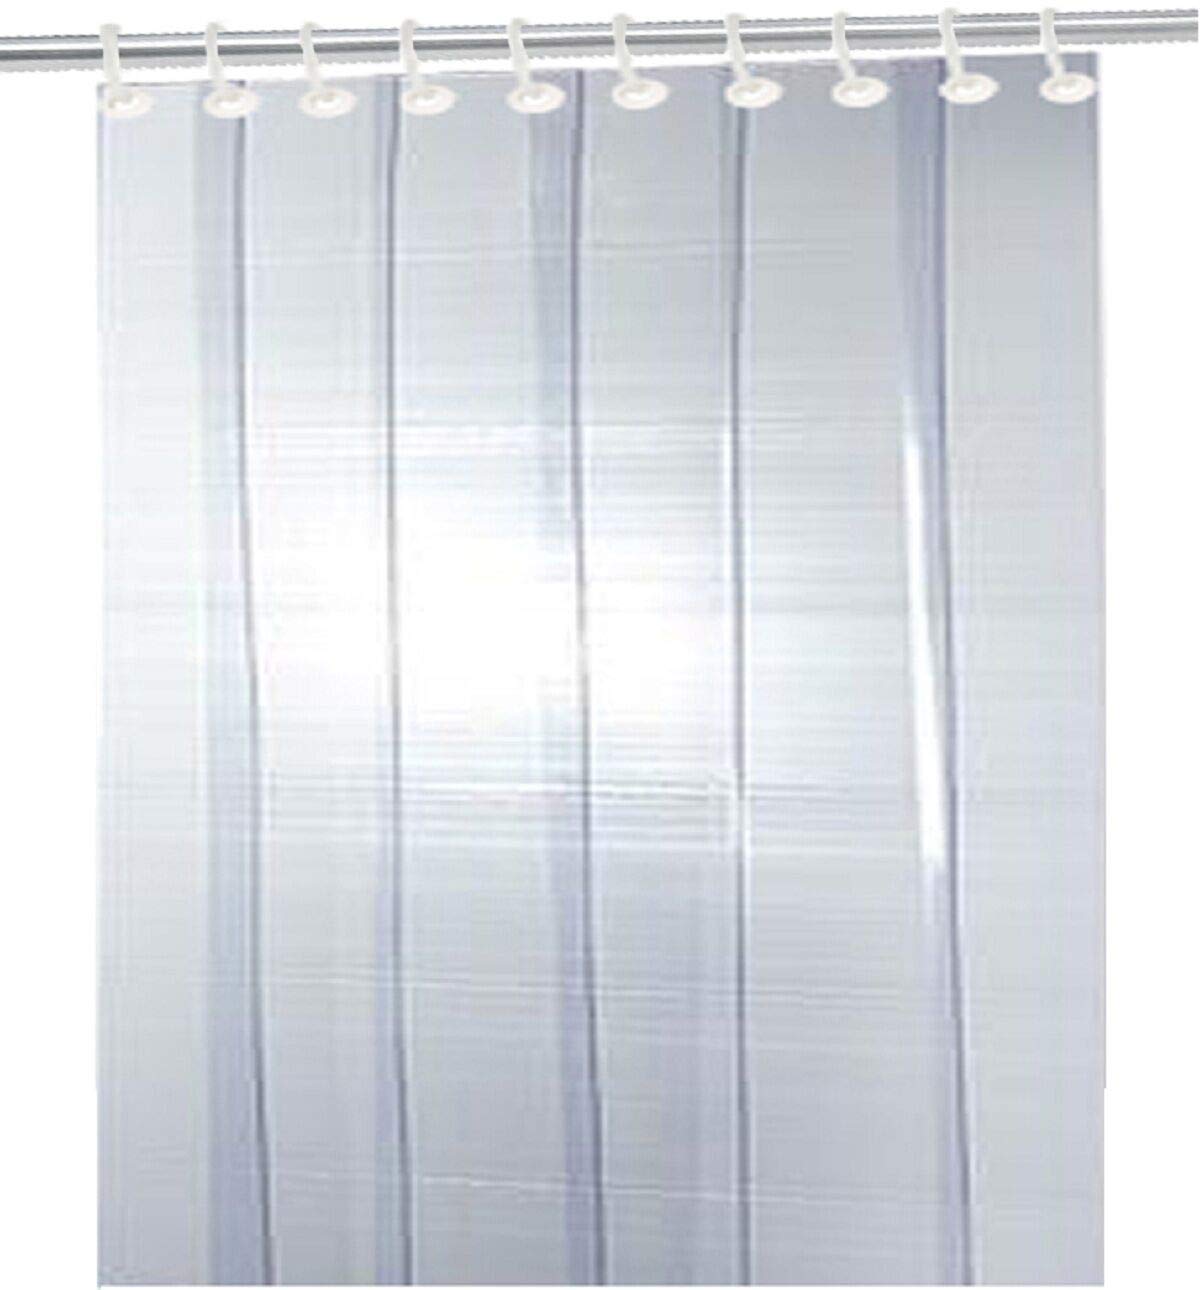 Kuber Industries PVC 6 Strips AC Curtain|Eyelet Rings & Waterproof Material|.1 MM Thickness & Mold Mildew Free|Size 7 Feet (Transparent)